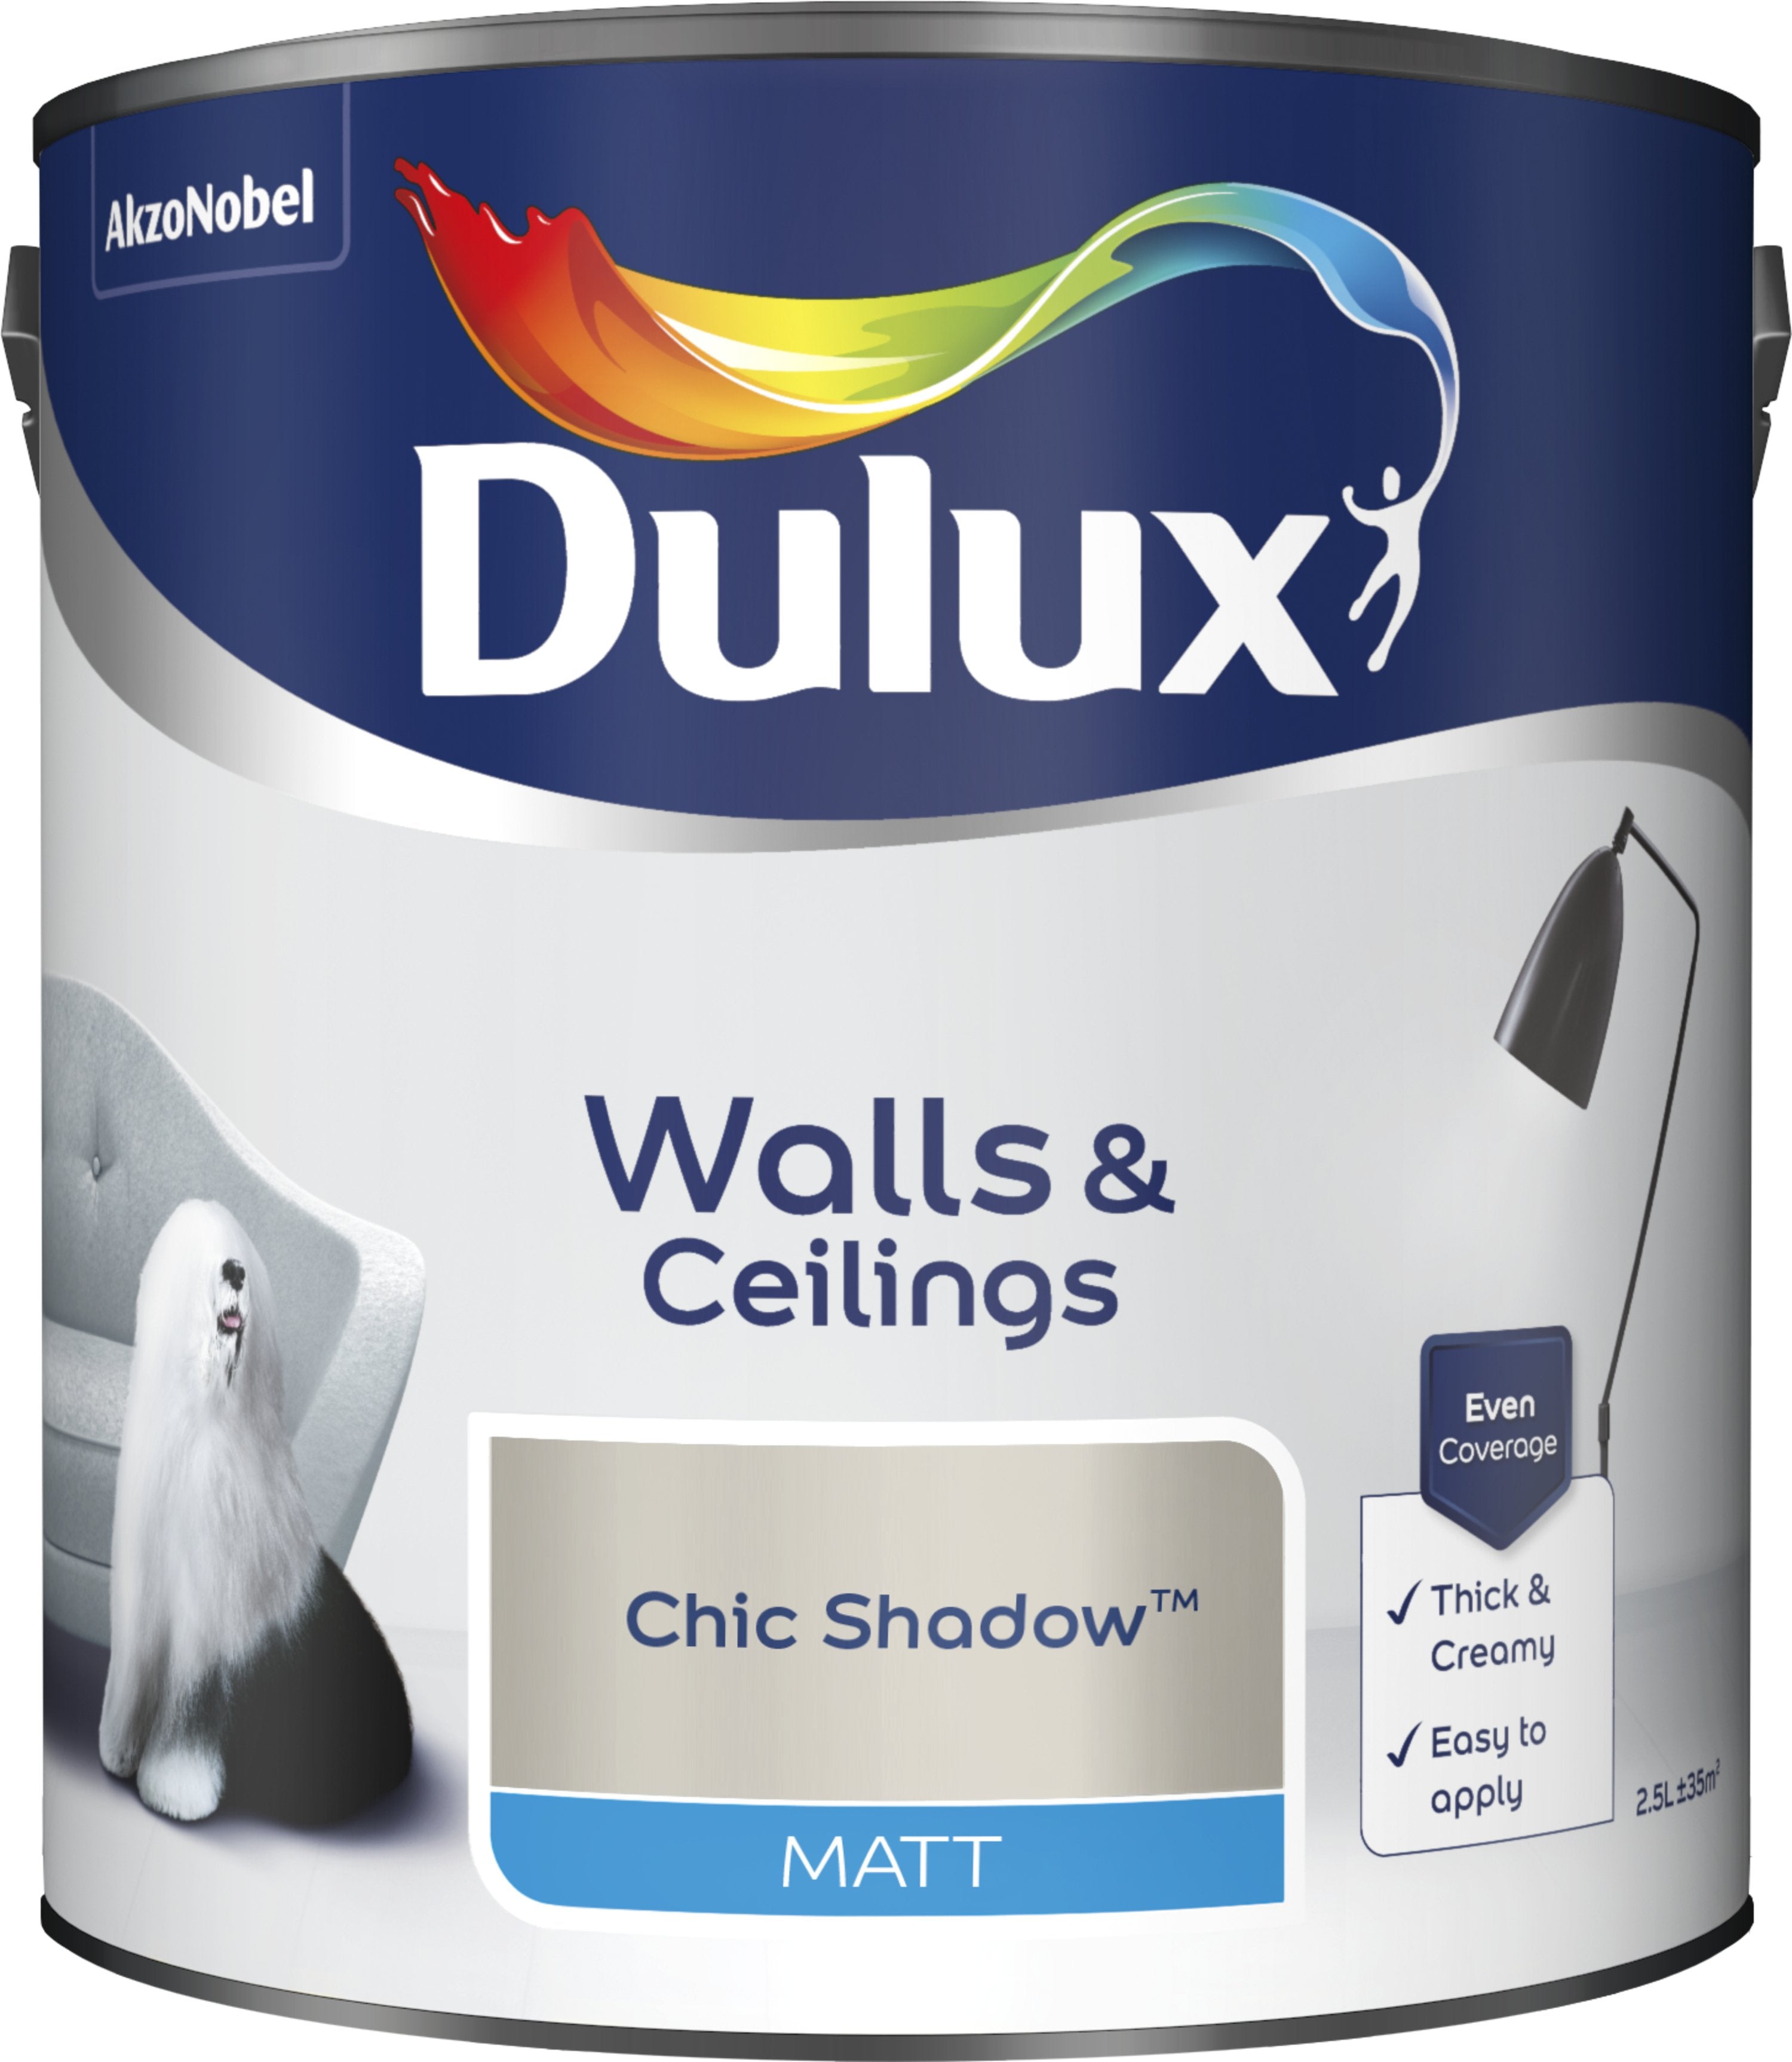 Dulux Matt Emulsion Paint For Walls And Ceilings - Chic Shadow 2.5L Garden & Diy  Home Improvements